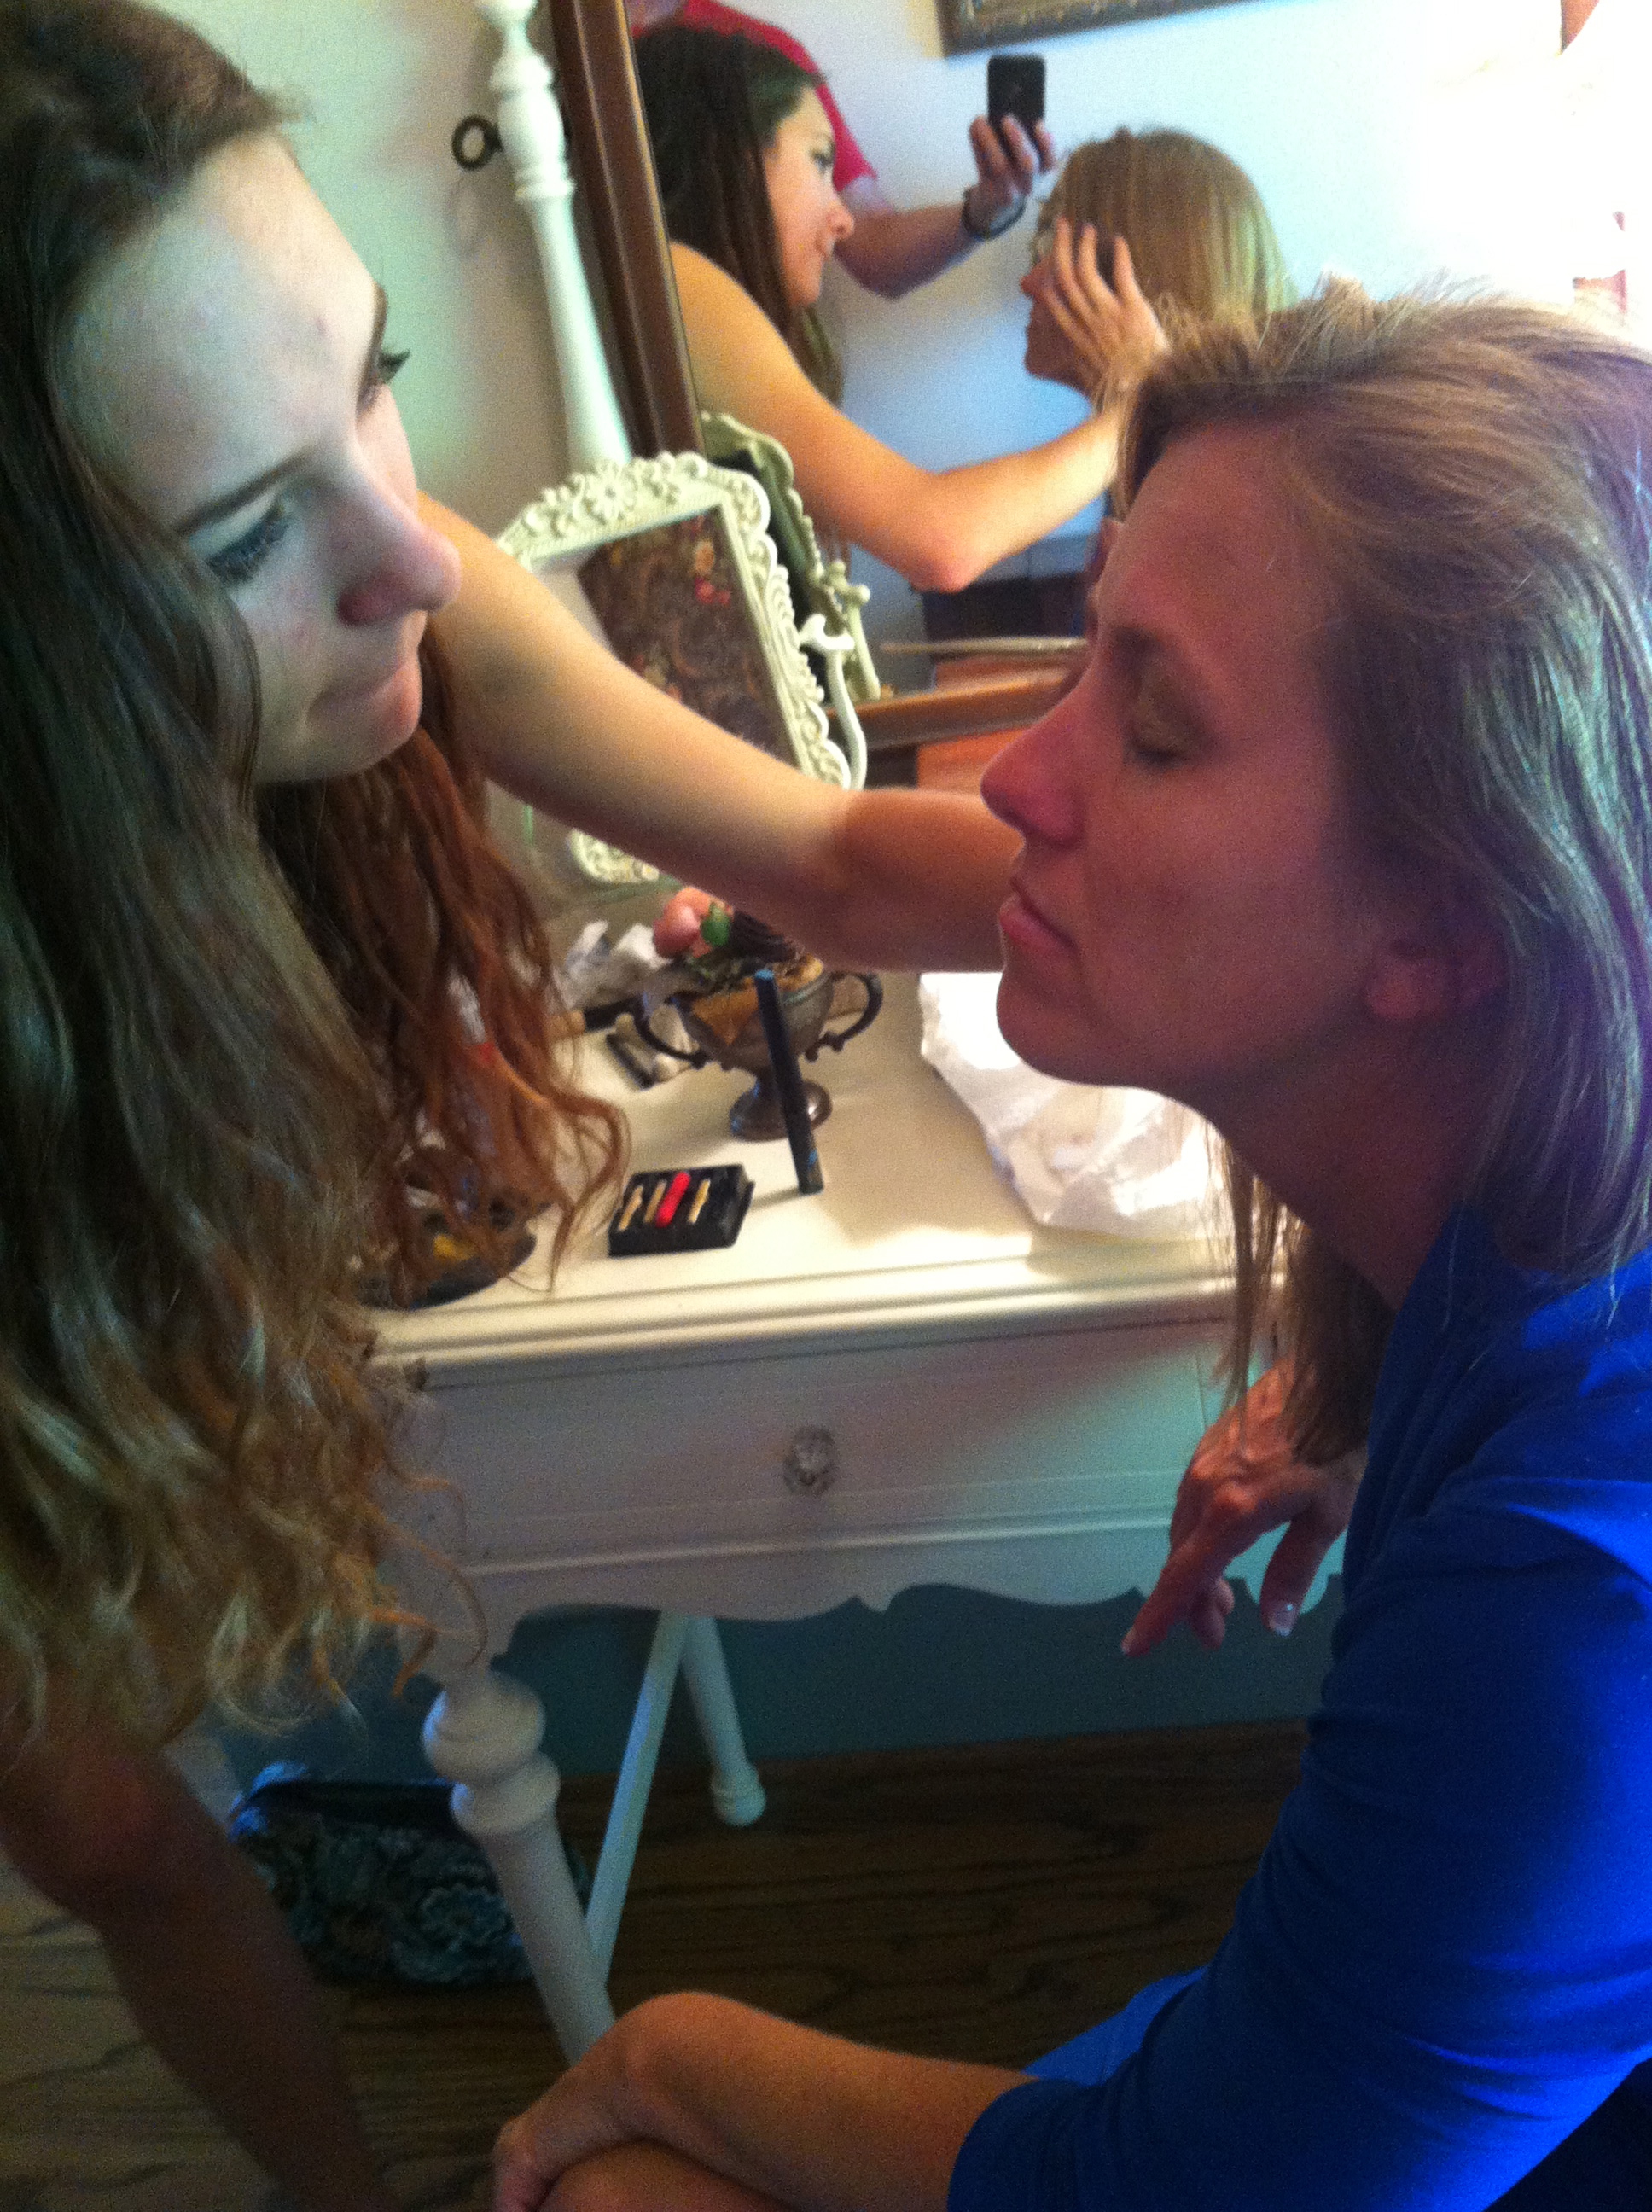 Libby Felten having Make-up done by Kate Lillo